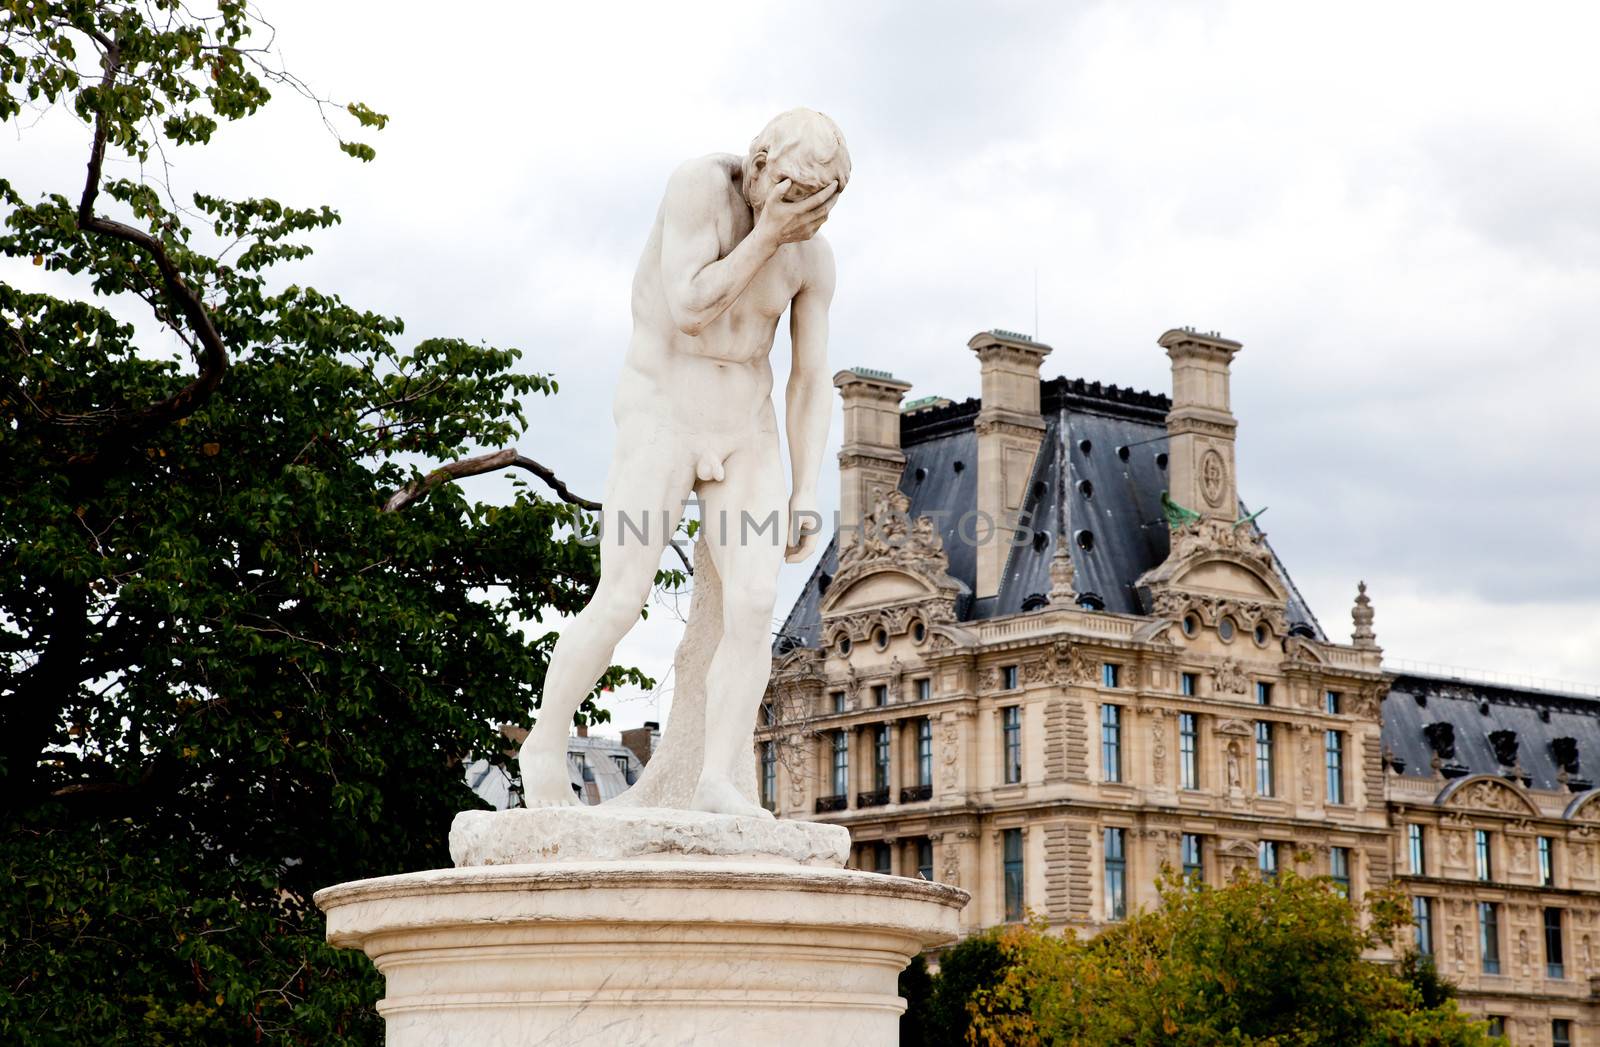 Paris - Statue from Tuileries garden near the Louvre